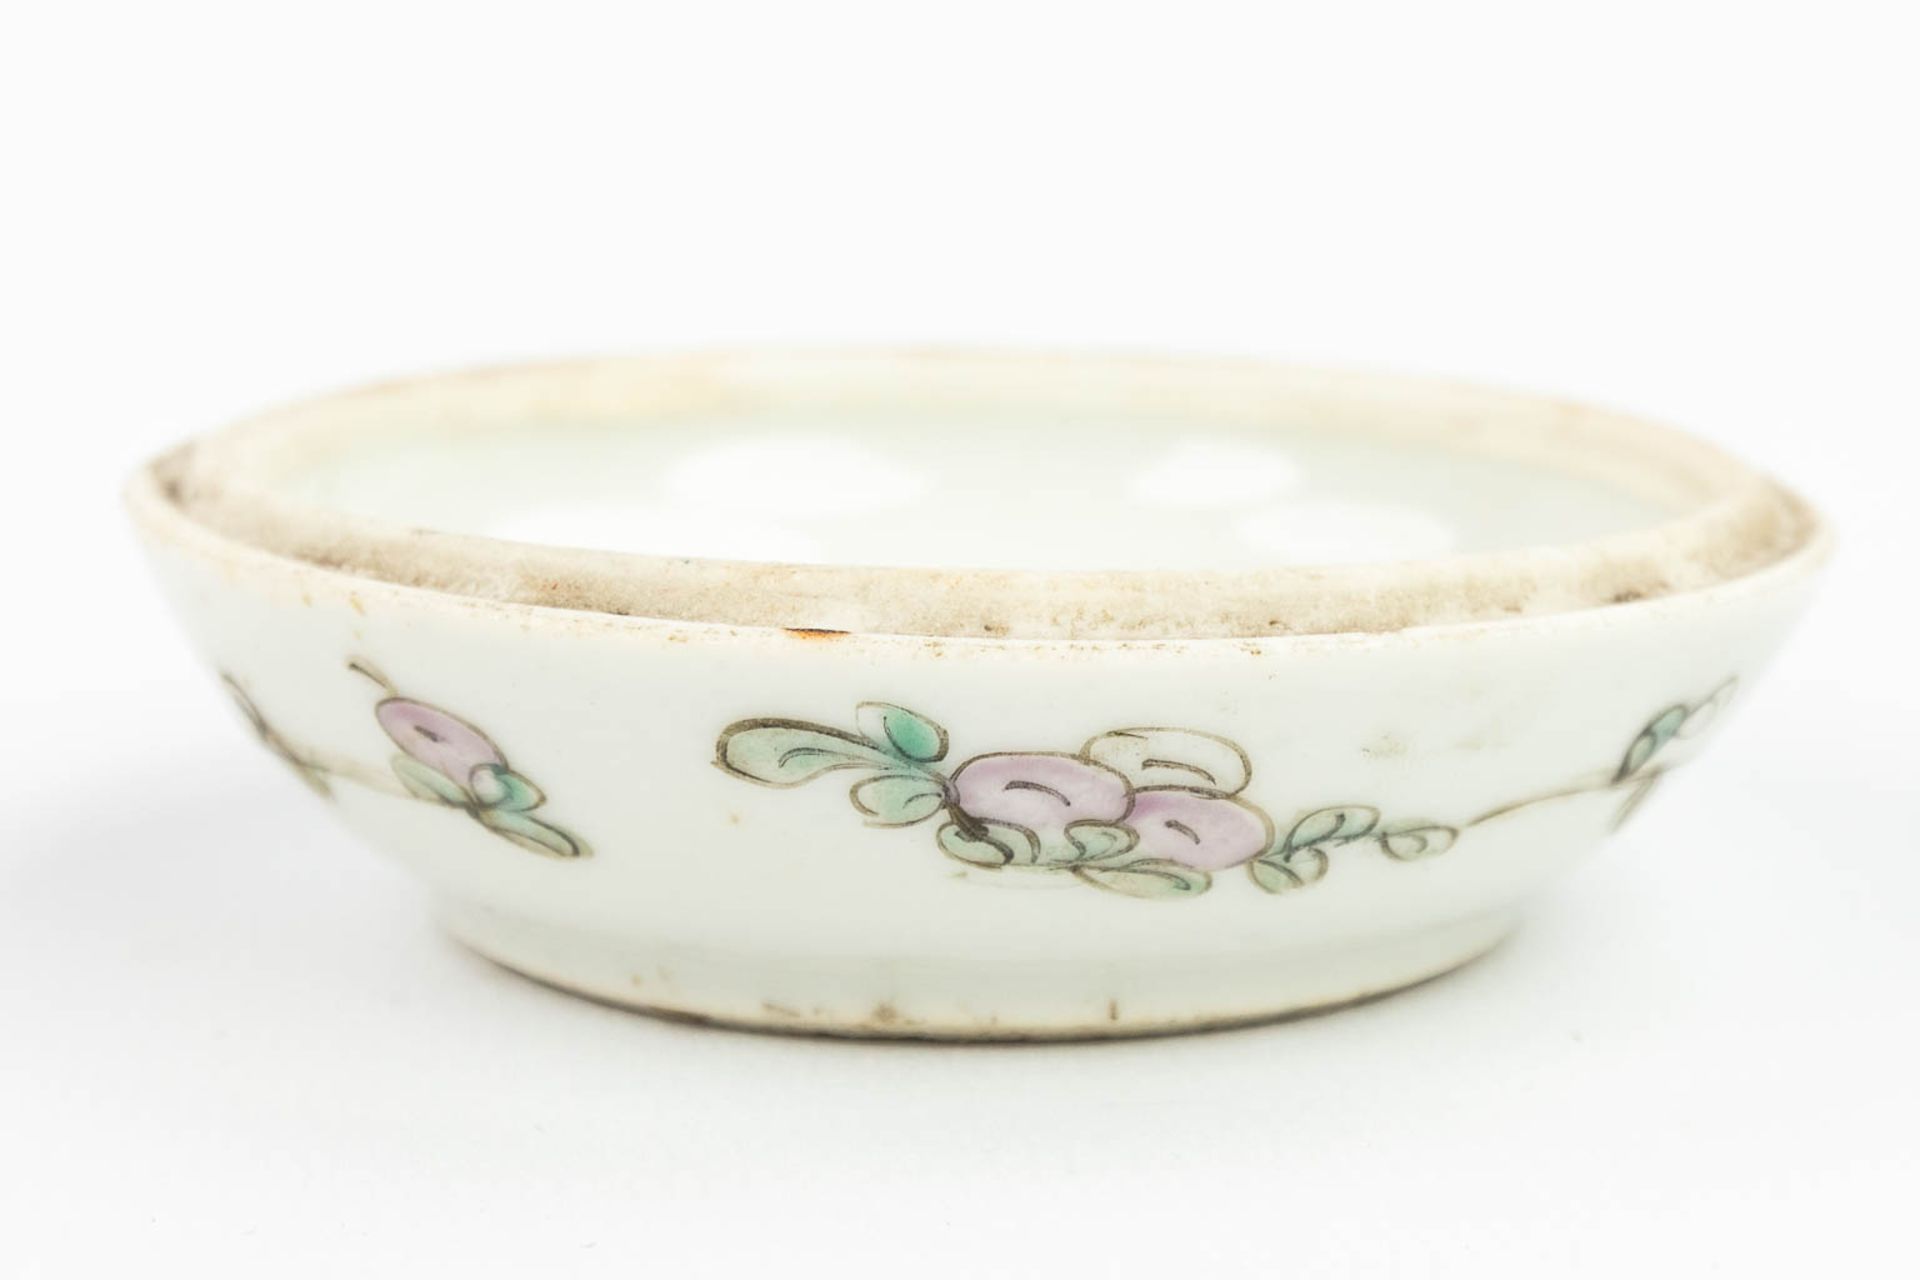 AÊset of 2 Chinese pots with lid, with hand-painted decor and made of porcelain (5 x 8,5 cm) - Image 3 of 18